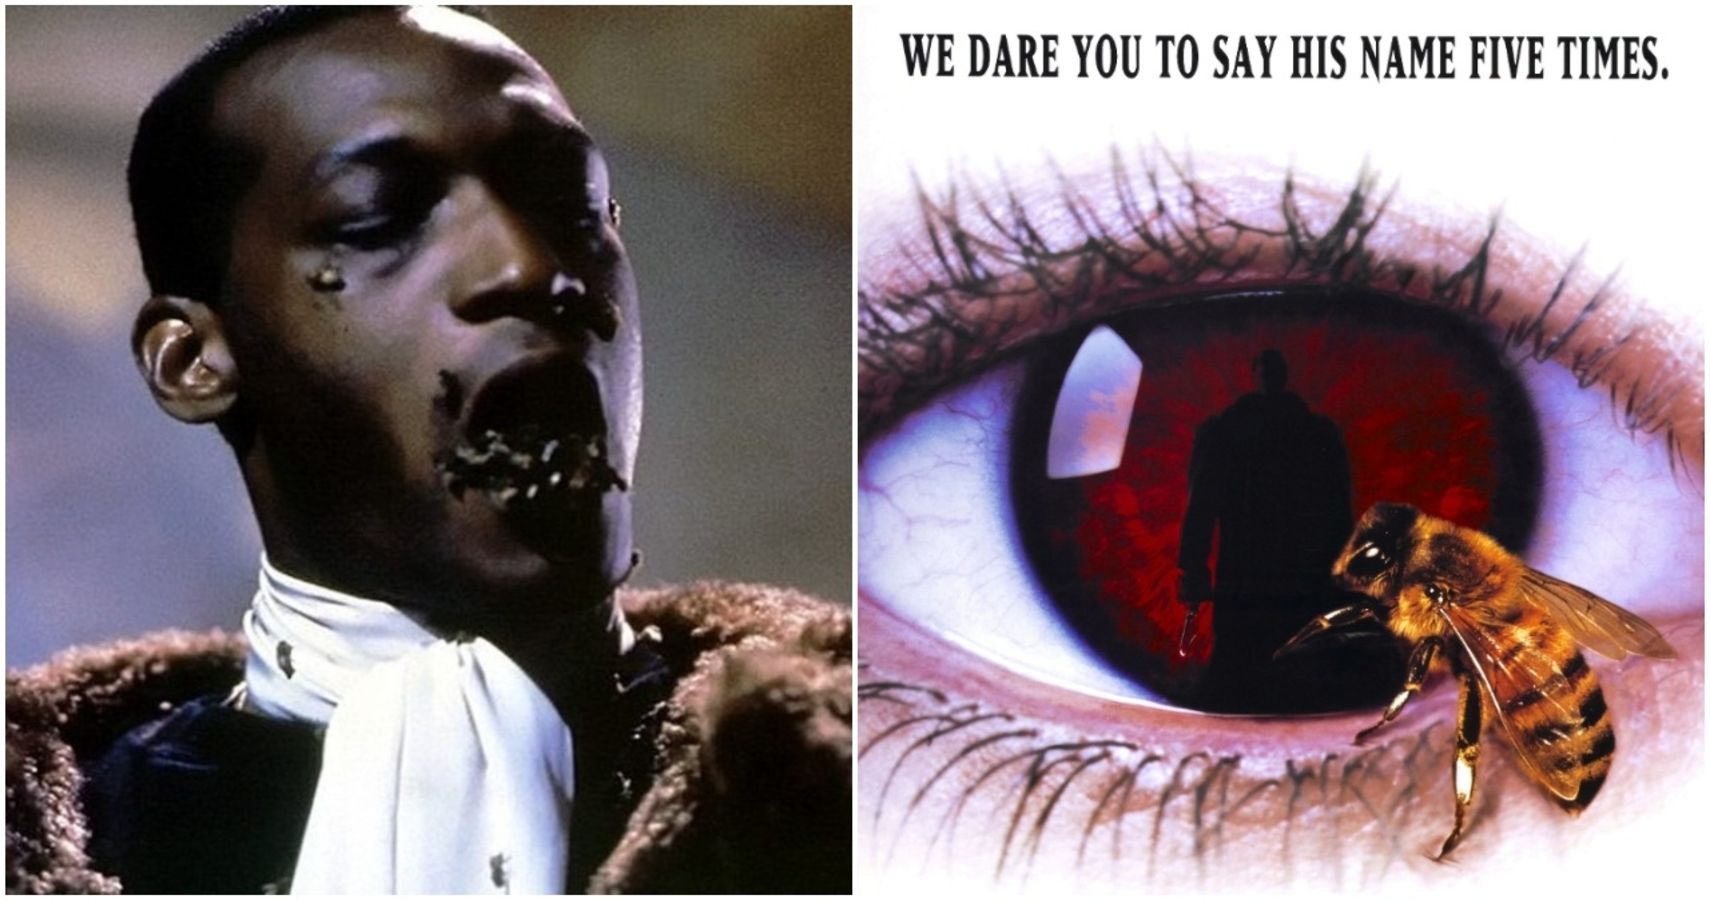 Candyman: The 10 Scariest Moments From The Original Movies